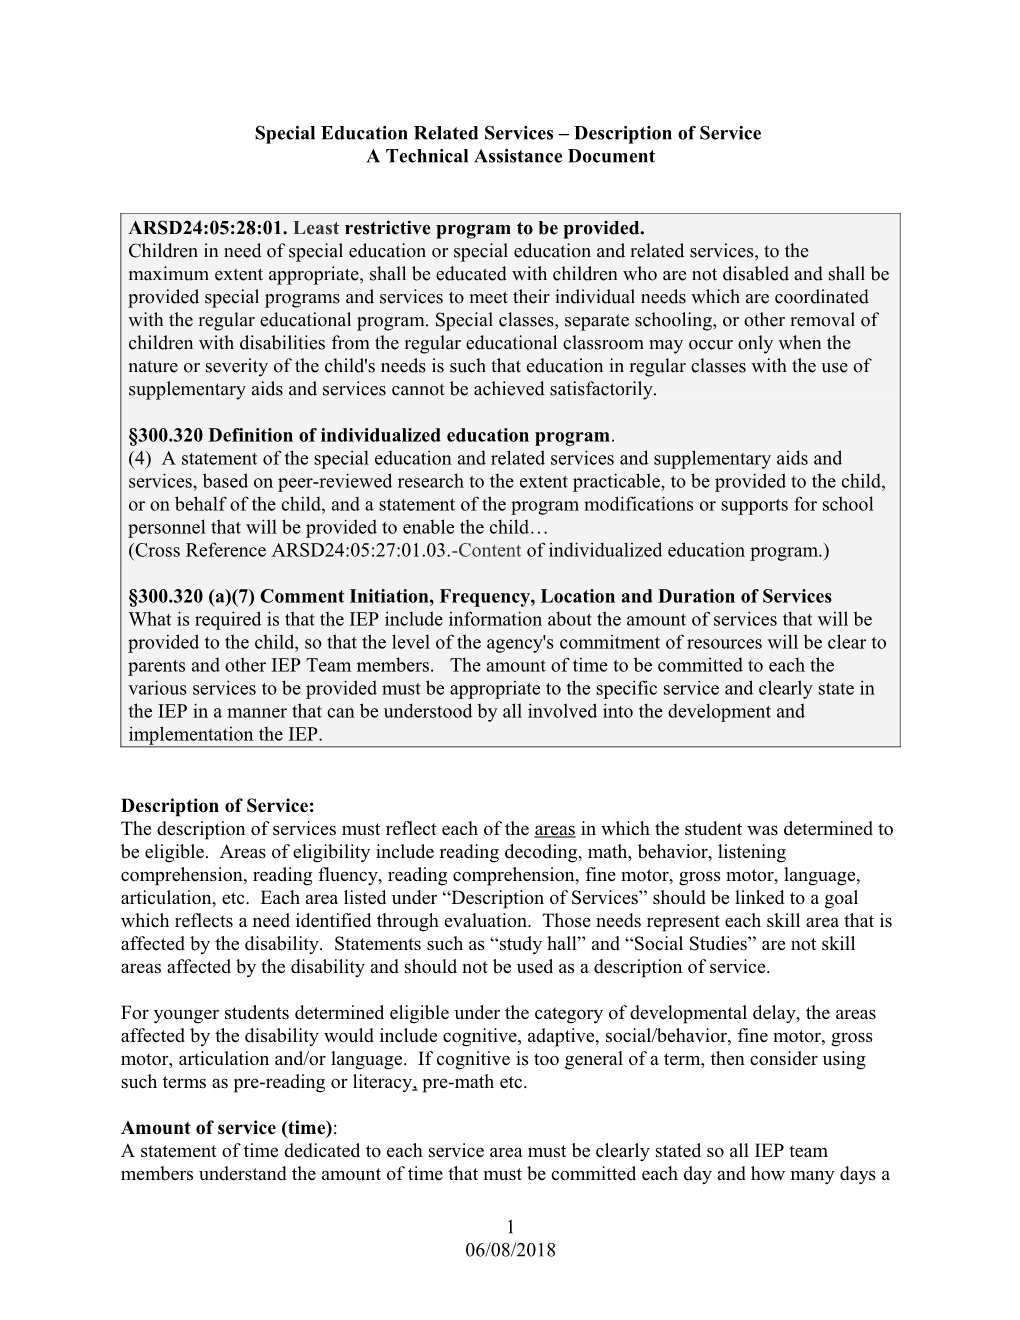 Special Education Related Services Description of Service